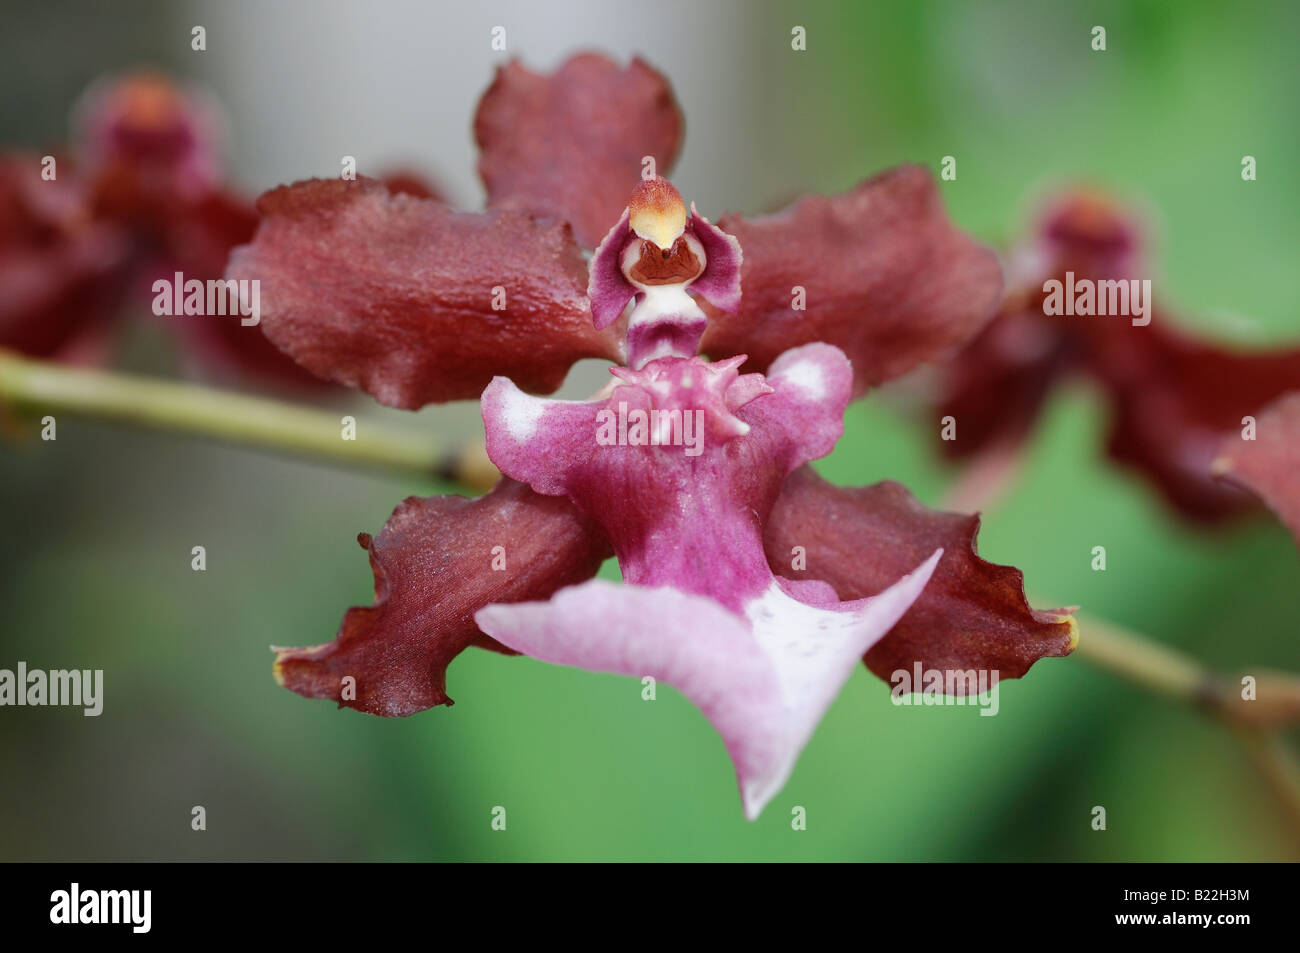 detail close up macro image of Oncidium Sharry Baby orchid flowers var sp species variant Stock Photo